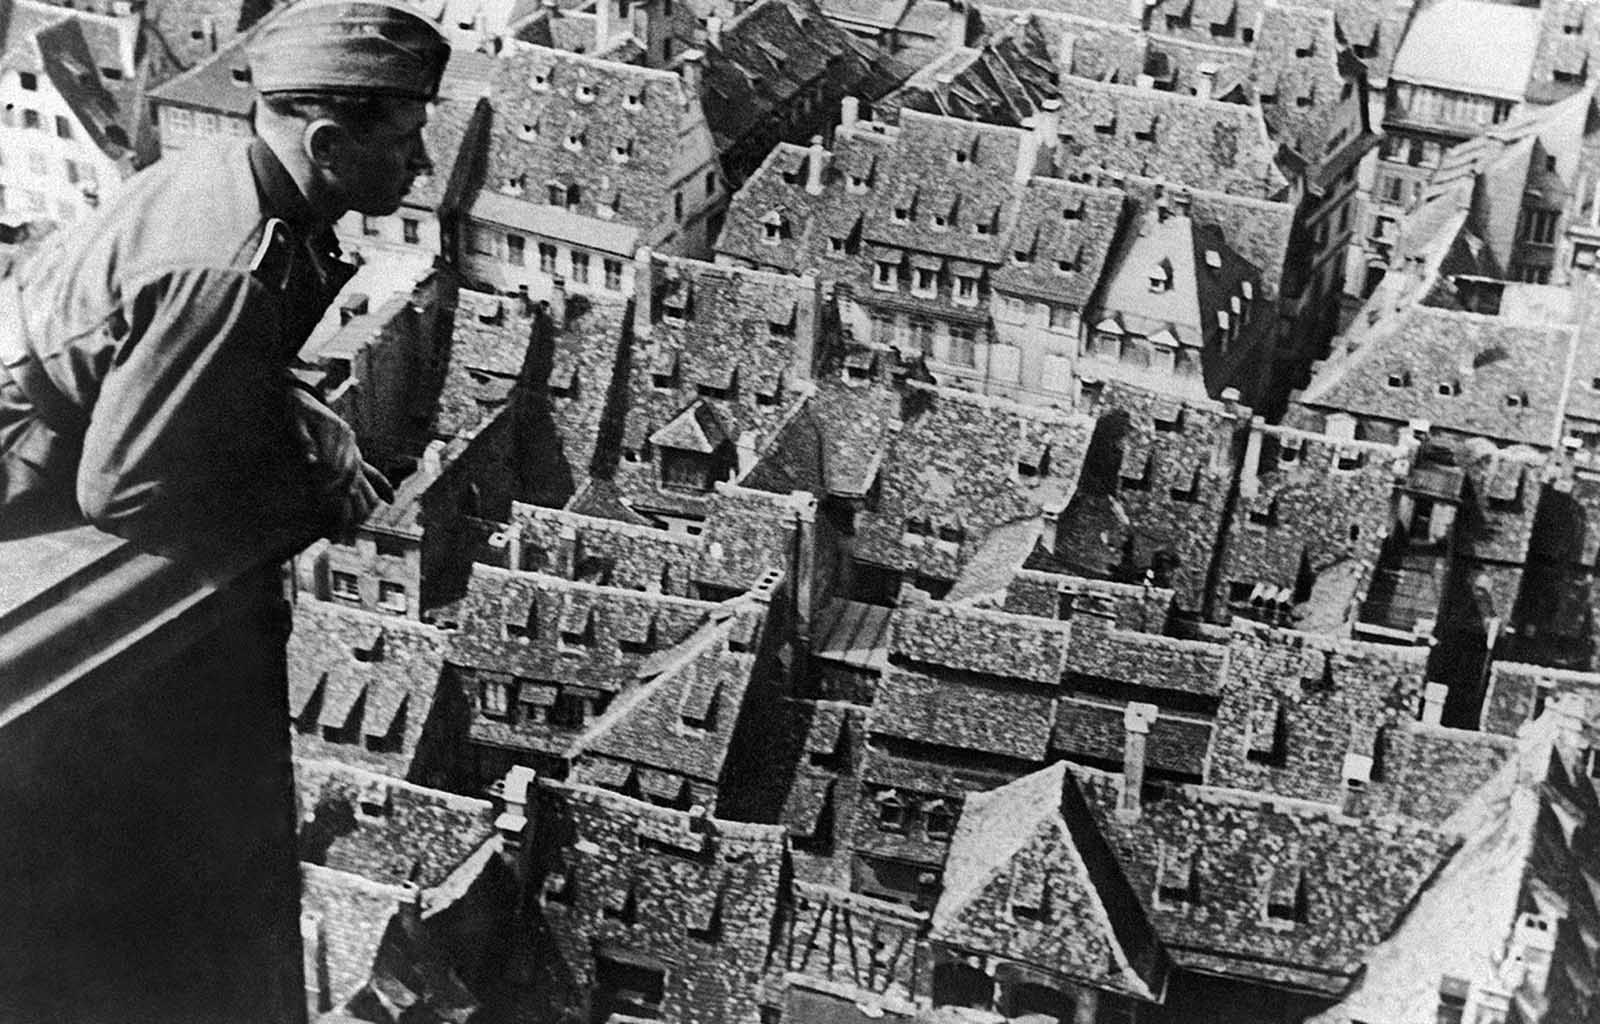 A German soldier stands in the tower of the cathedral, gazing down upon the captured French city of Strasbourg on July 15, 1940. Adolf Hitler visited the city in June of 1940, declaring plans for the Strasbourg Cathedral, stating that it should become a 